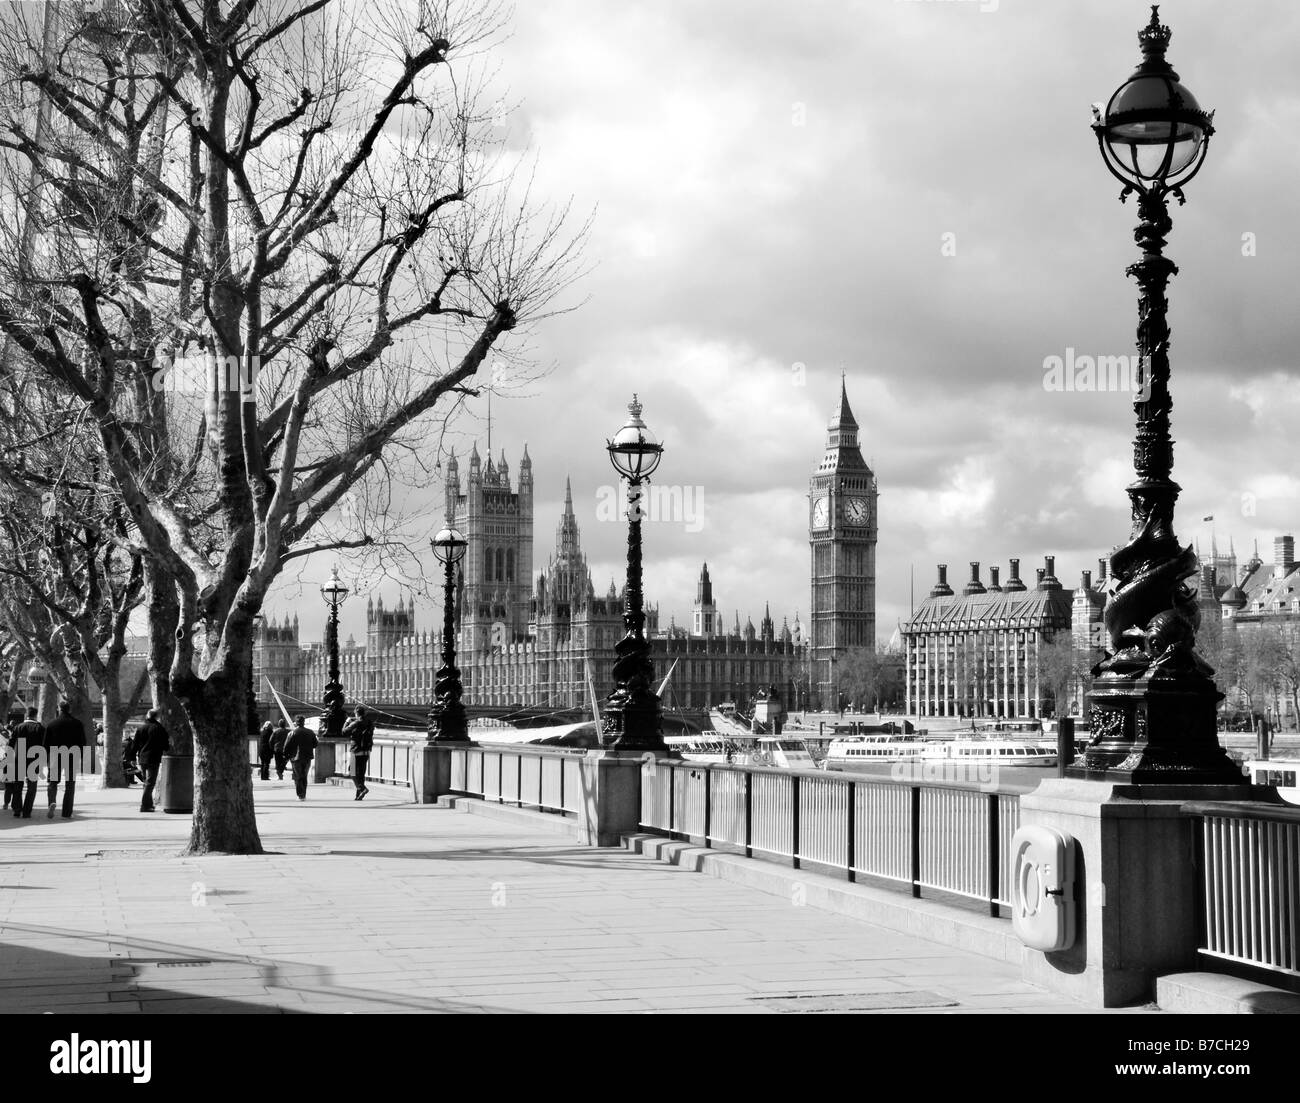 The Palace of Westminster as seen from the South Bank of the River Thames, London, UK Stock Photo